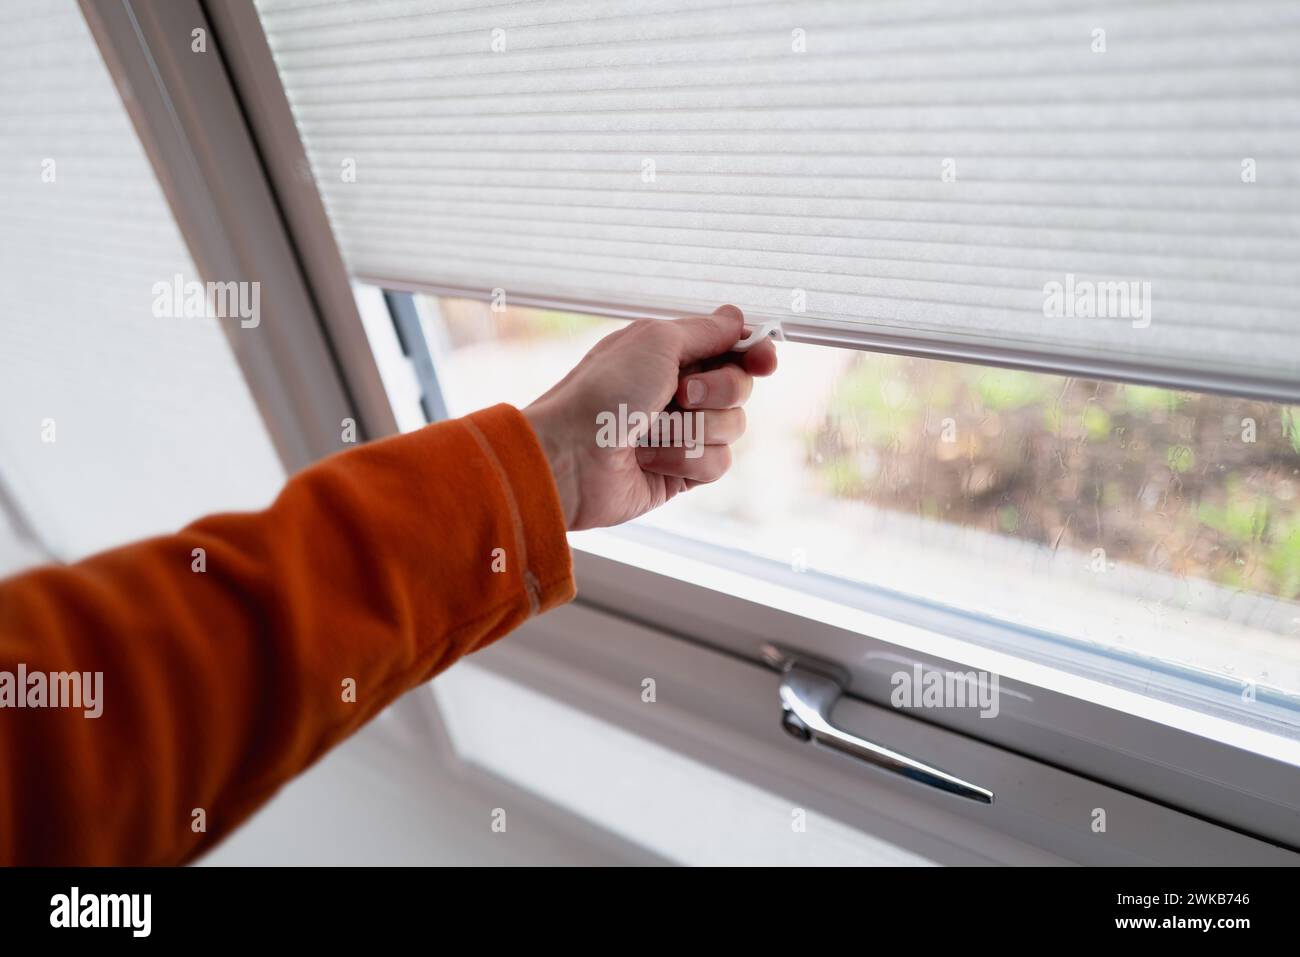 Hand holding the handle of made to measure conservatory blinds that slide up and down. Shallow focus. Stock Photo